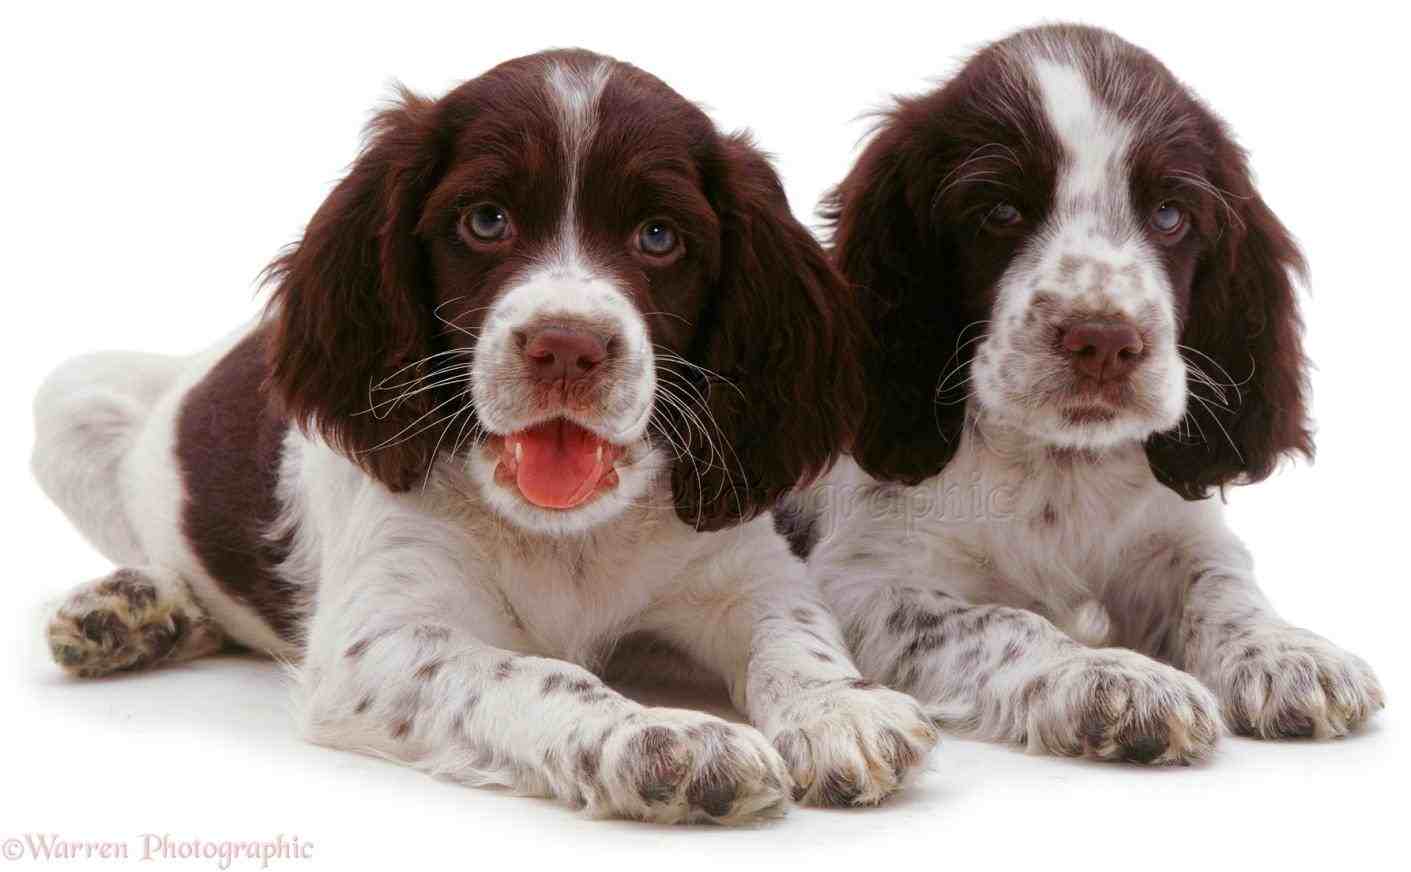 Great Of Cute Dogs. Information All About Dogs